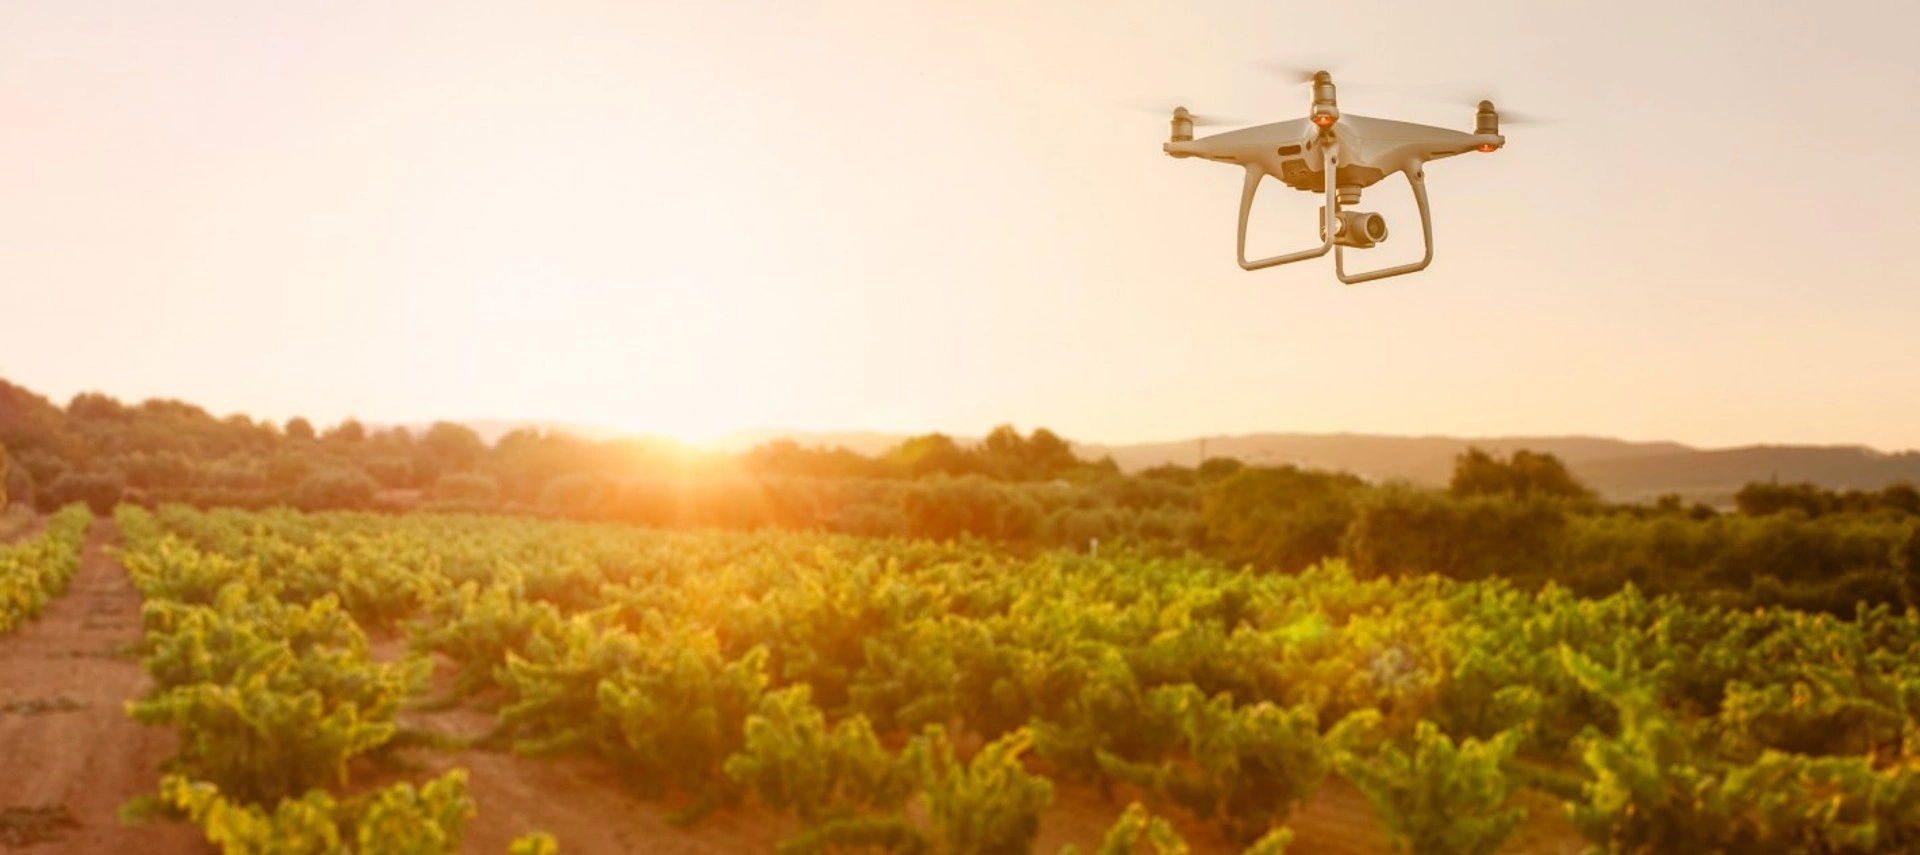 Remote Sensing And Artificial Intelligence Applications For Agribusiness